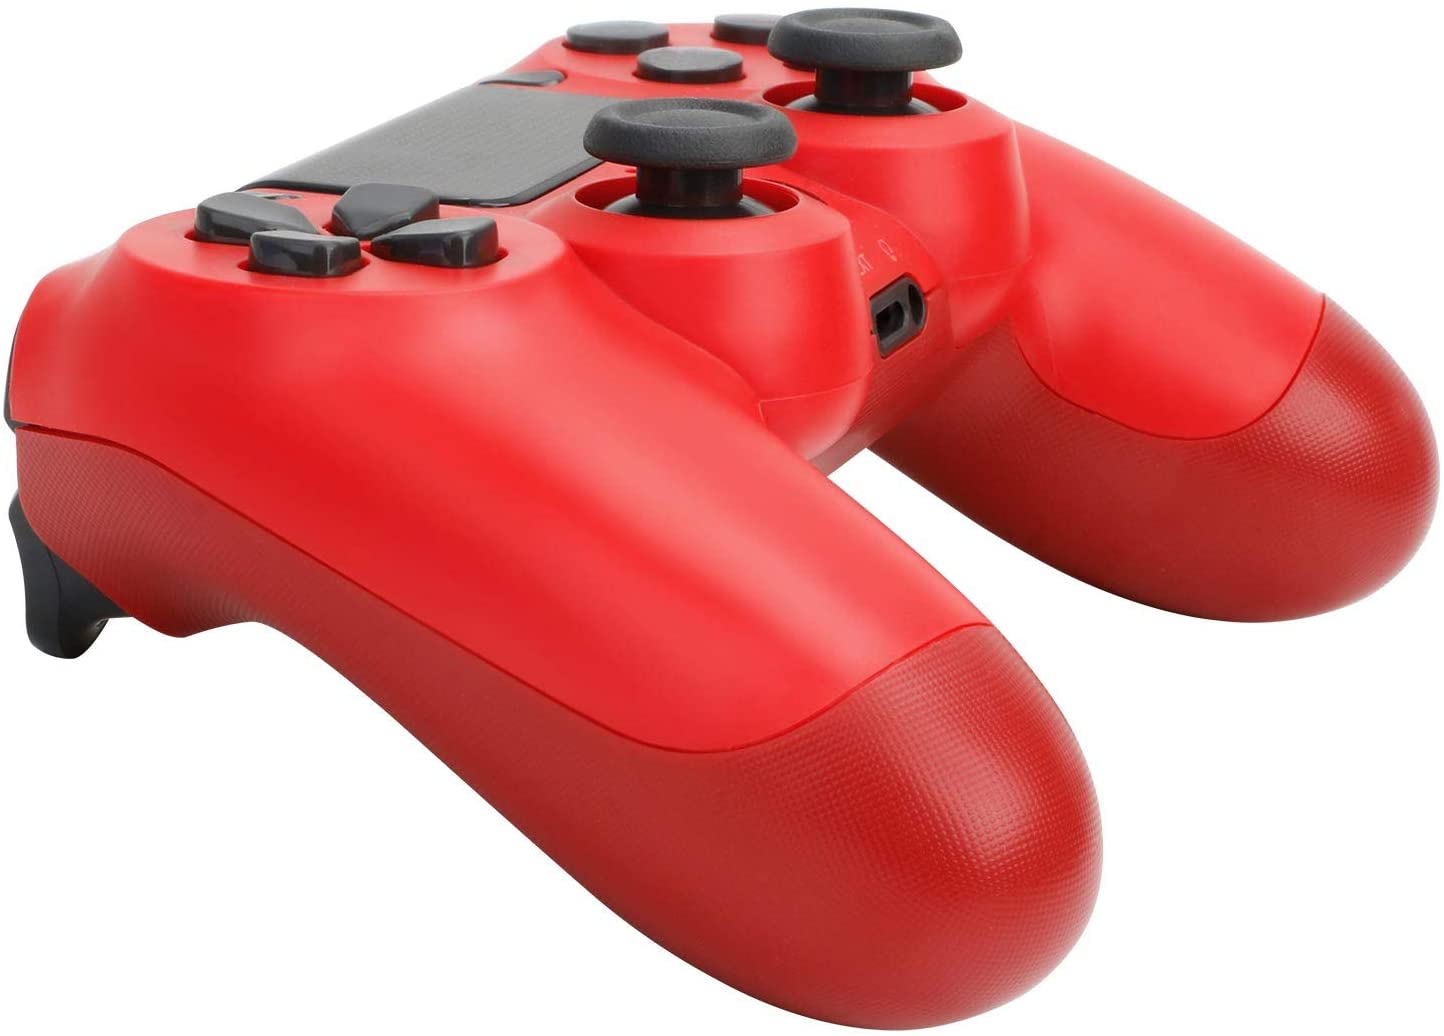 doubleshock 4 wireless PS4 controller